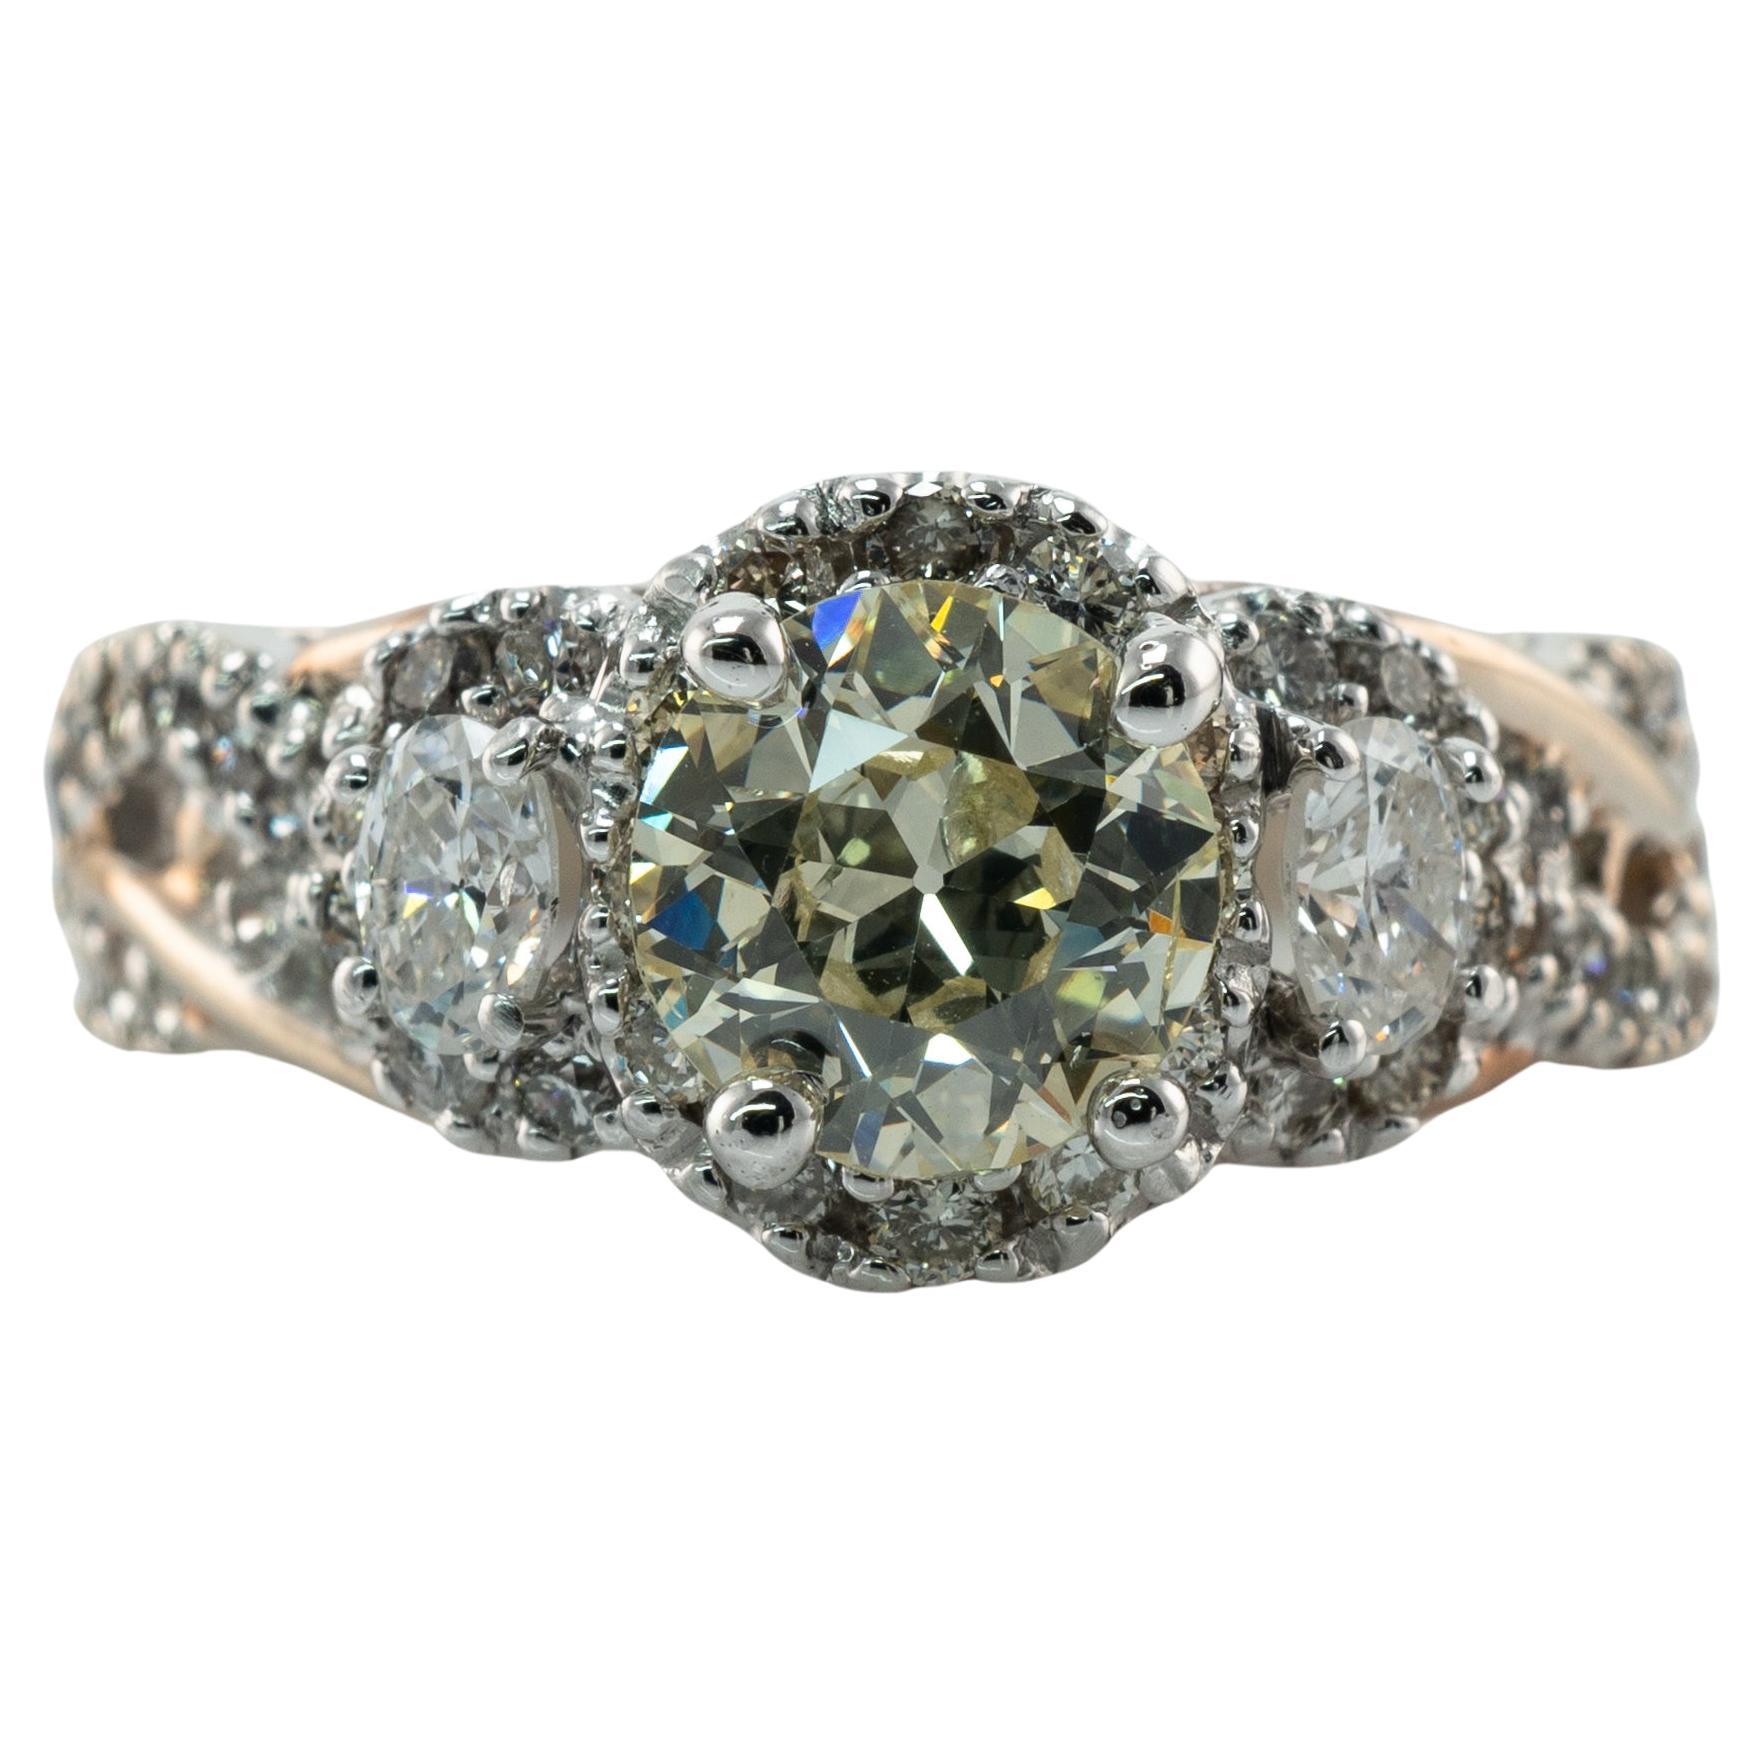 Estate Jewelry Engagement Rings